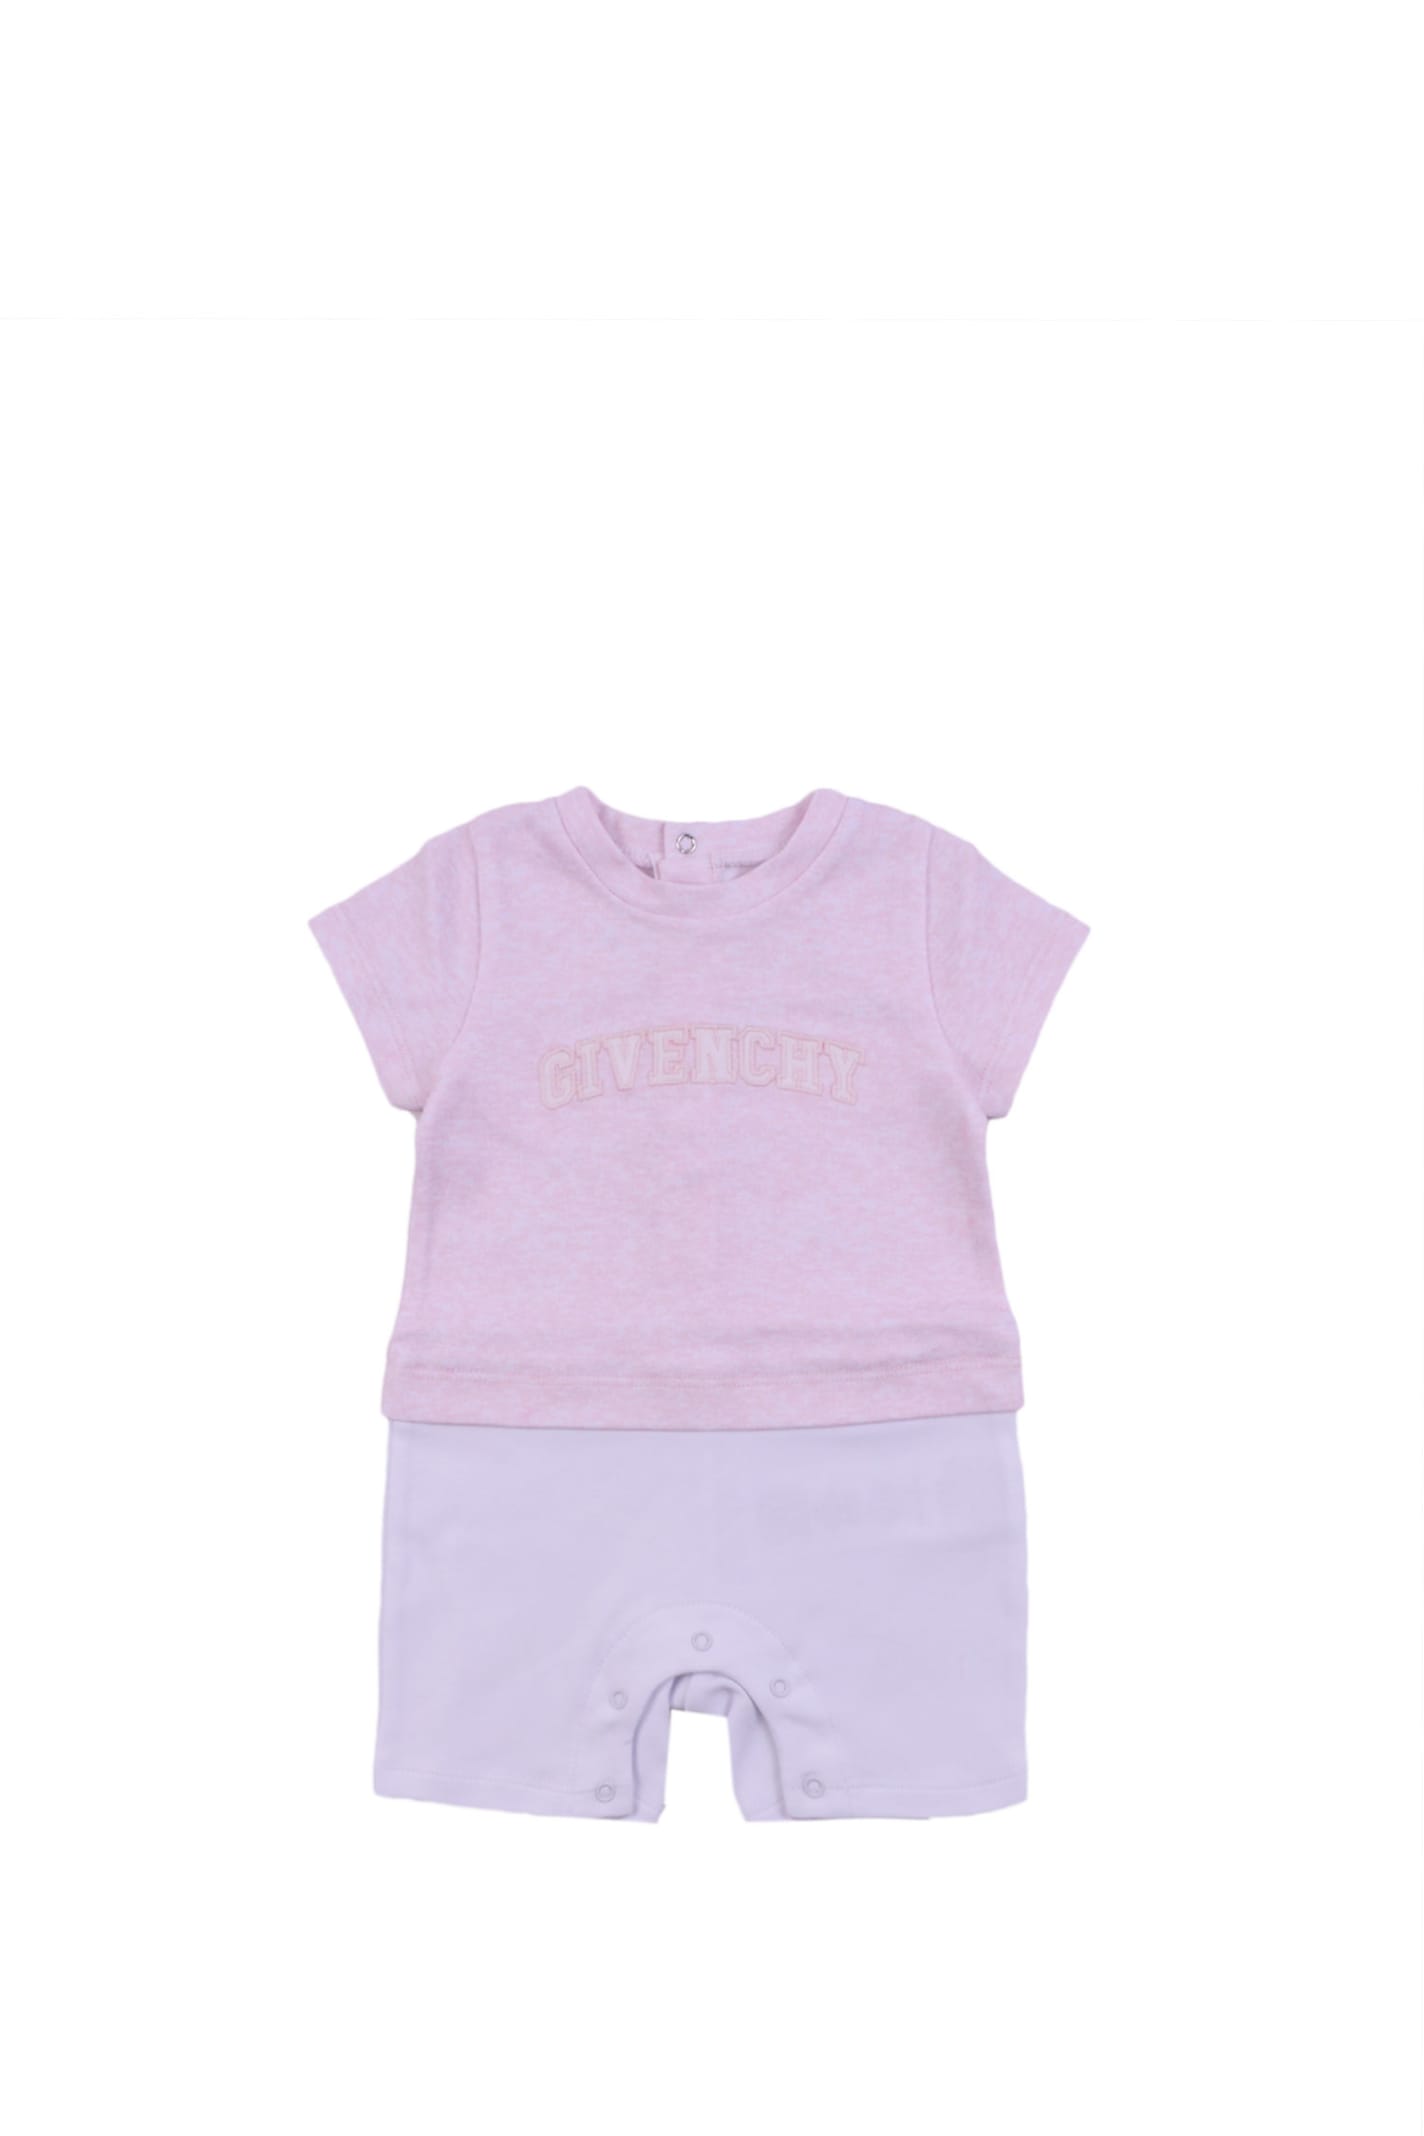 Givenchy Babies' Cotton Romper In Rose